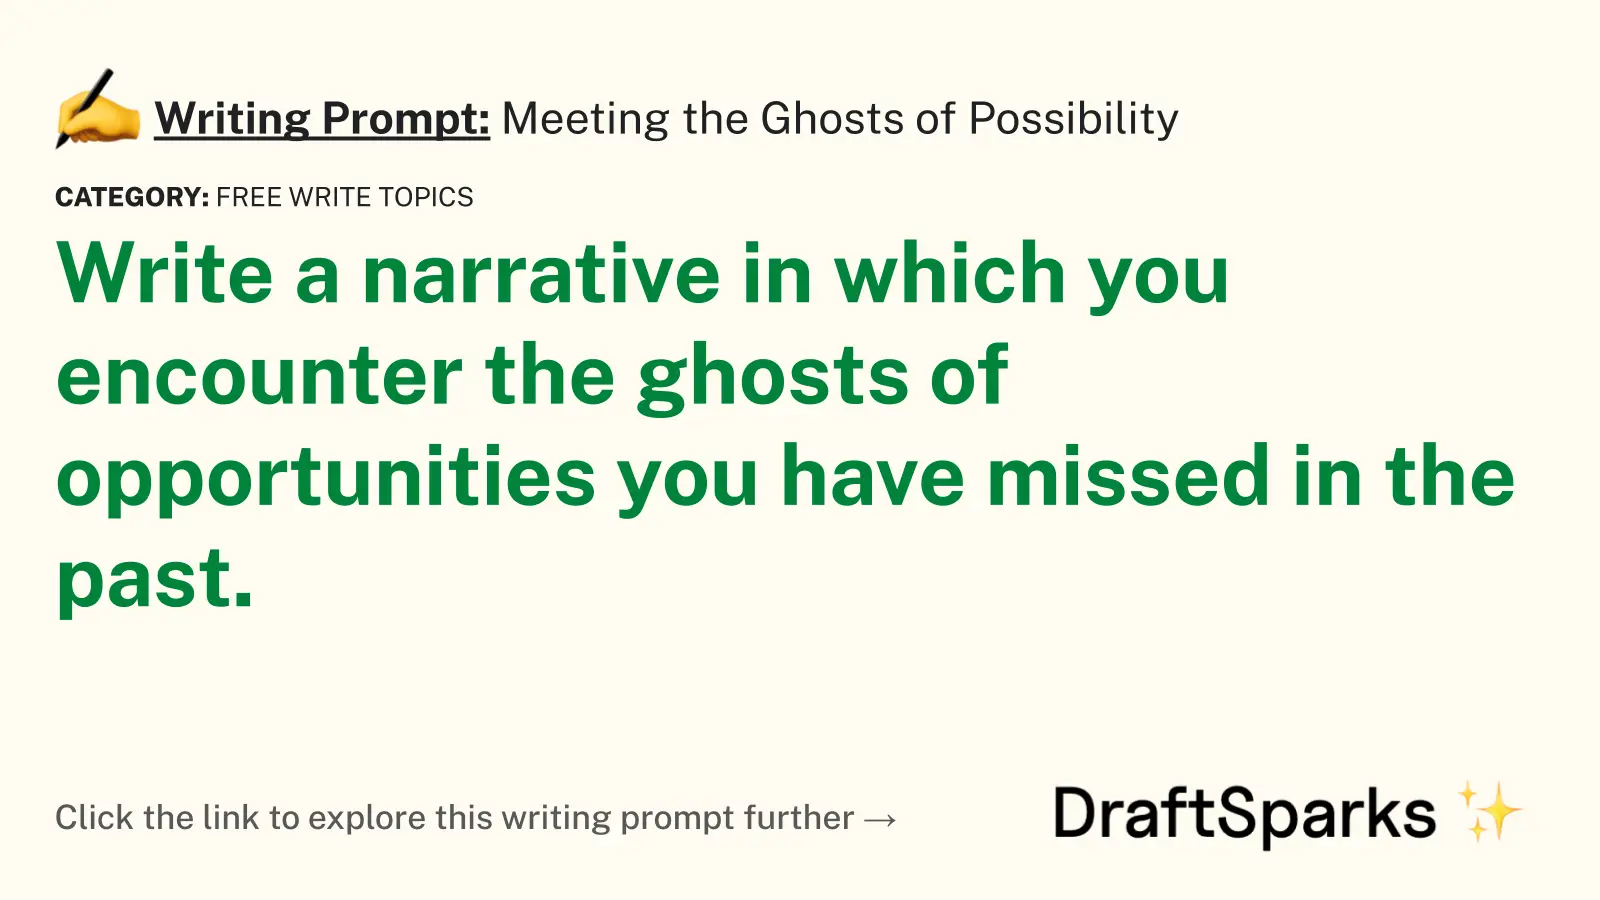 Meeting the Ghosts of Possibility